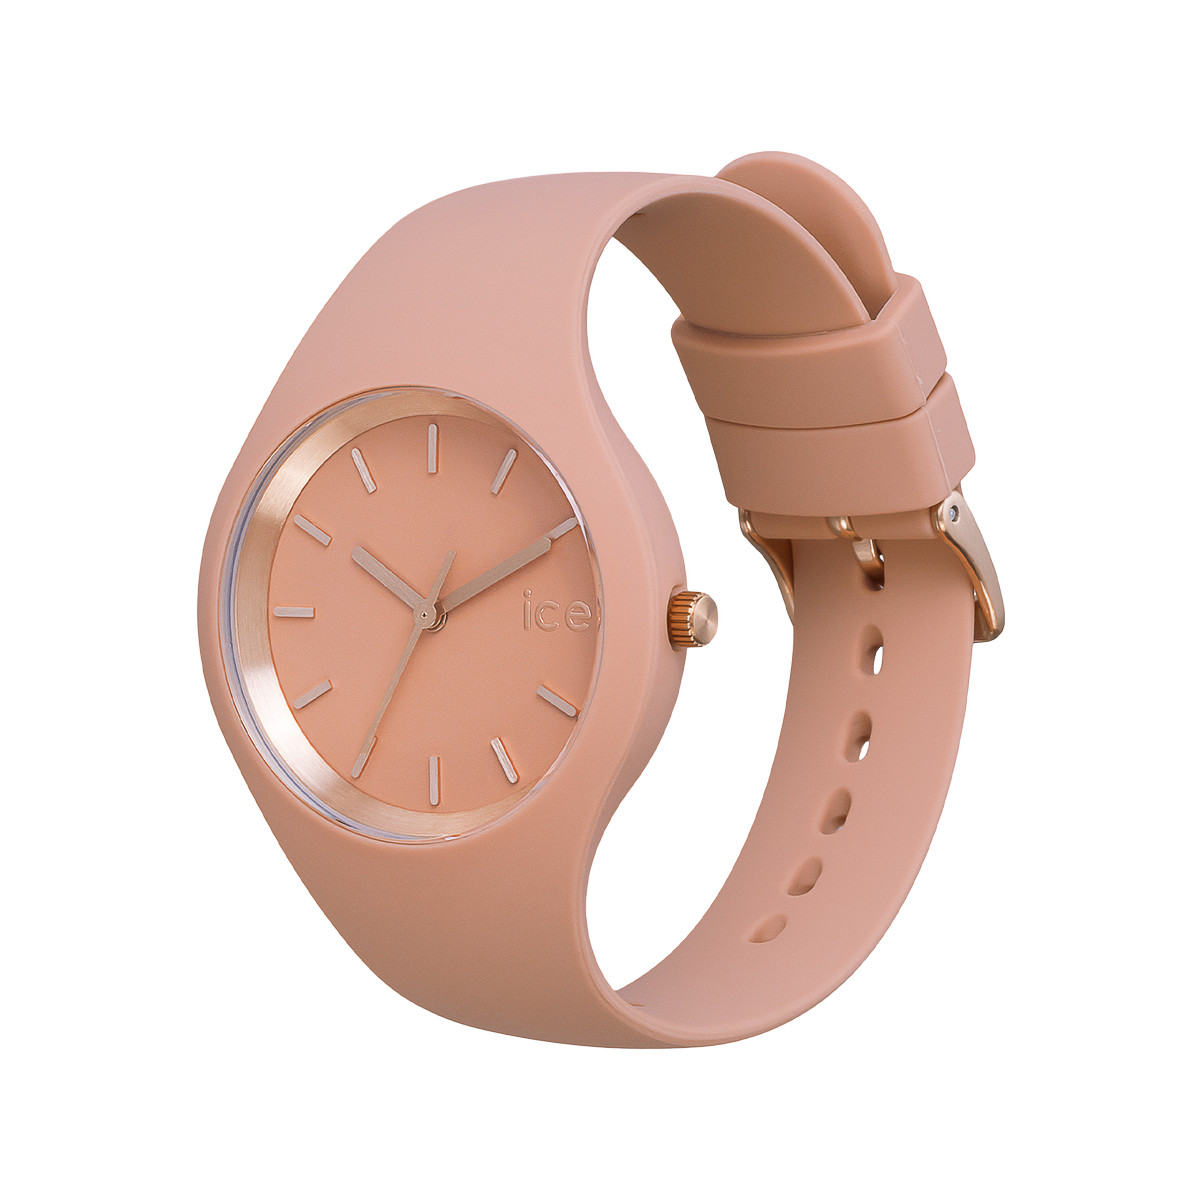 Montre Ice Watch Femme silicone rose - vue 2